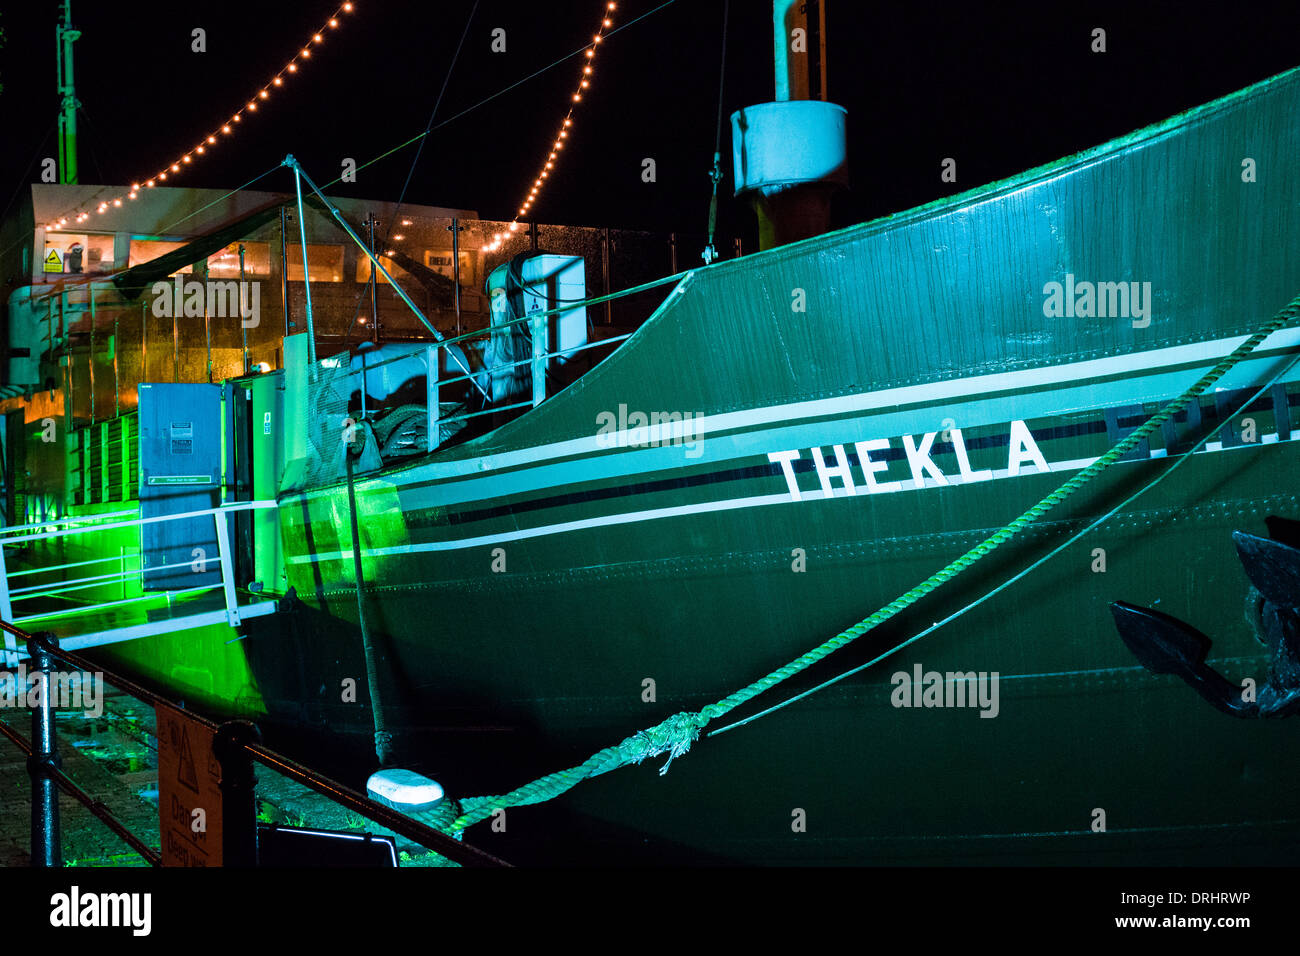 The Thekla nightclub and music venue floodlit at night, The Grove in Bristol Harbour, England. Stock Photo